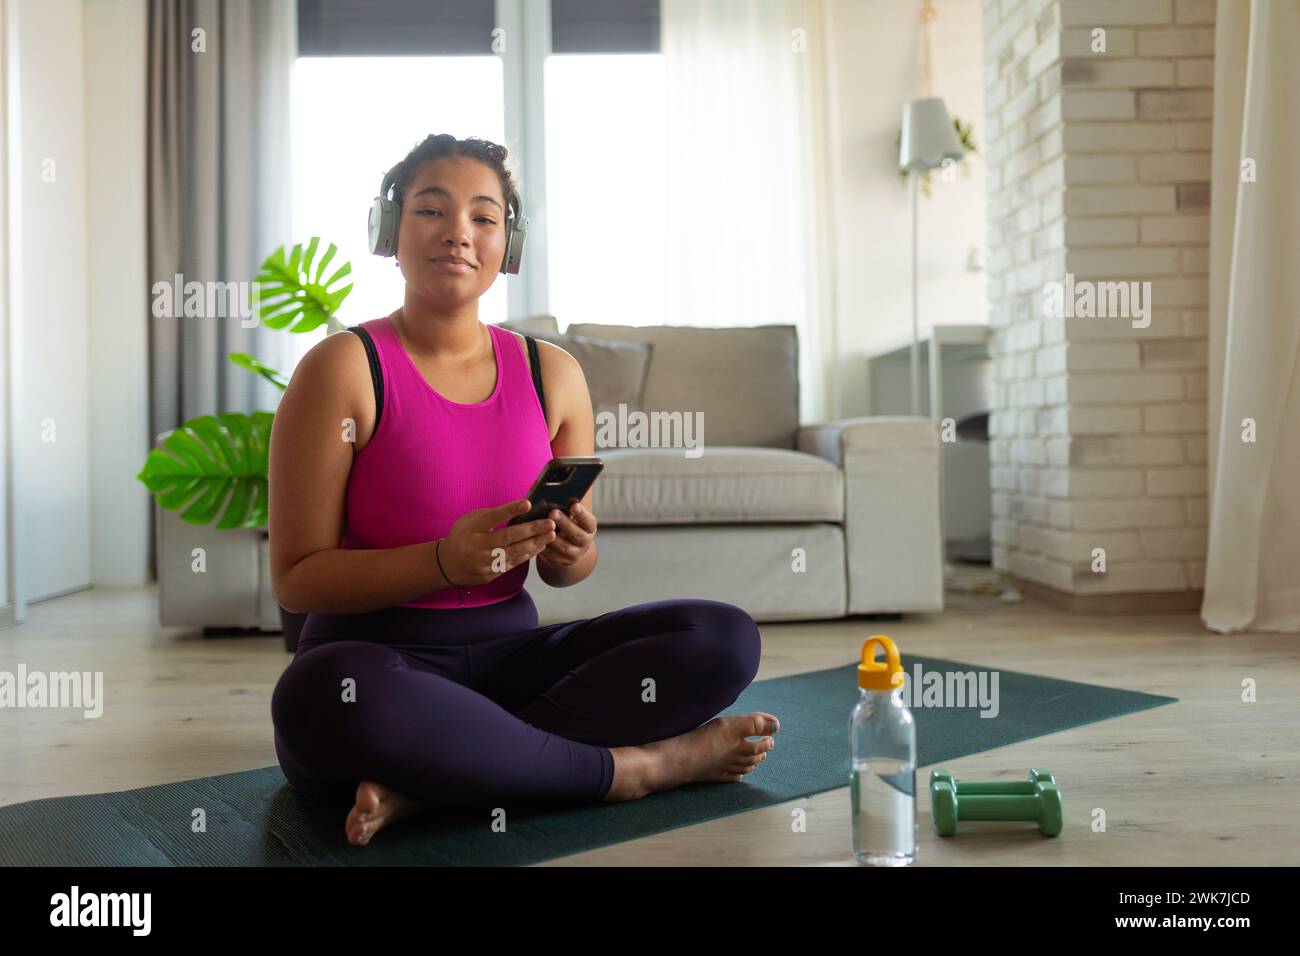 Woman resting after home workout, New Year's resolutions, healthy lifestyle, losing weight and selfcare. Concept of morning or evening workout routine Stock Photo